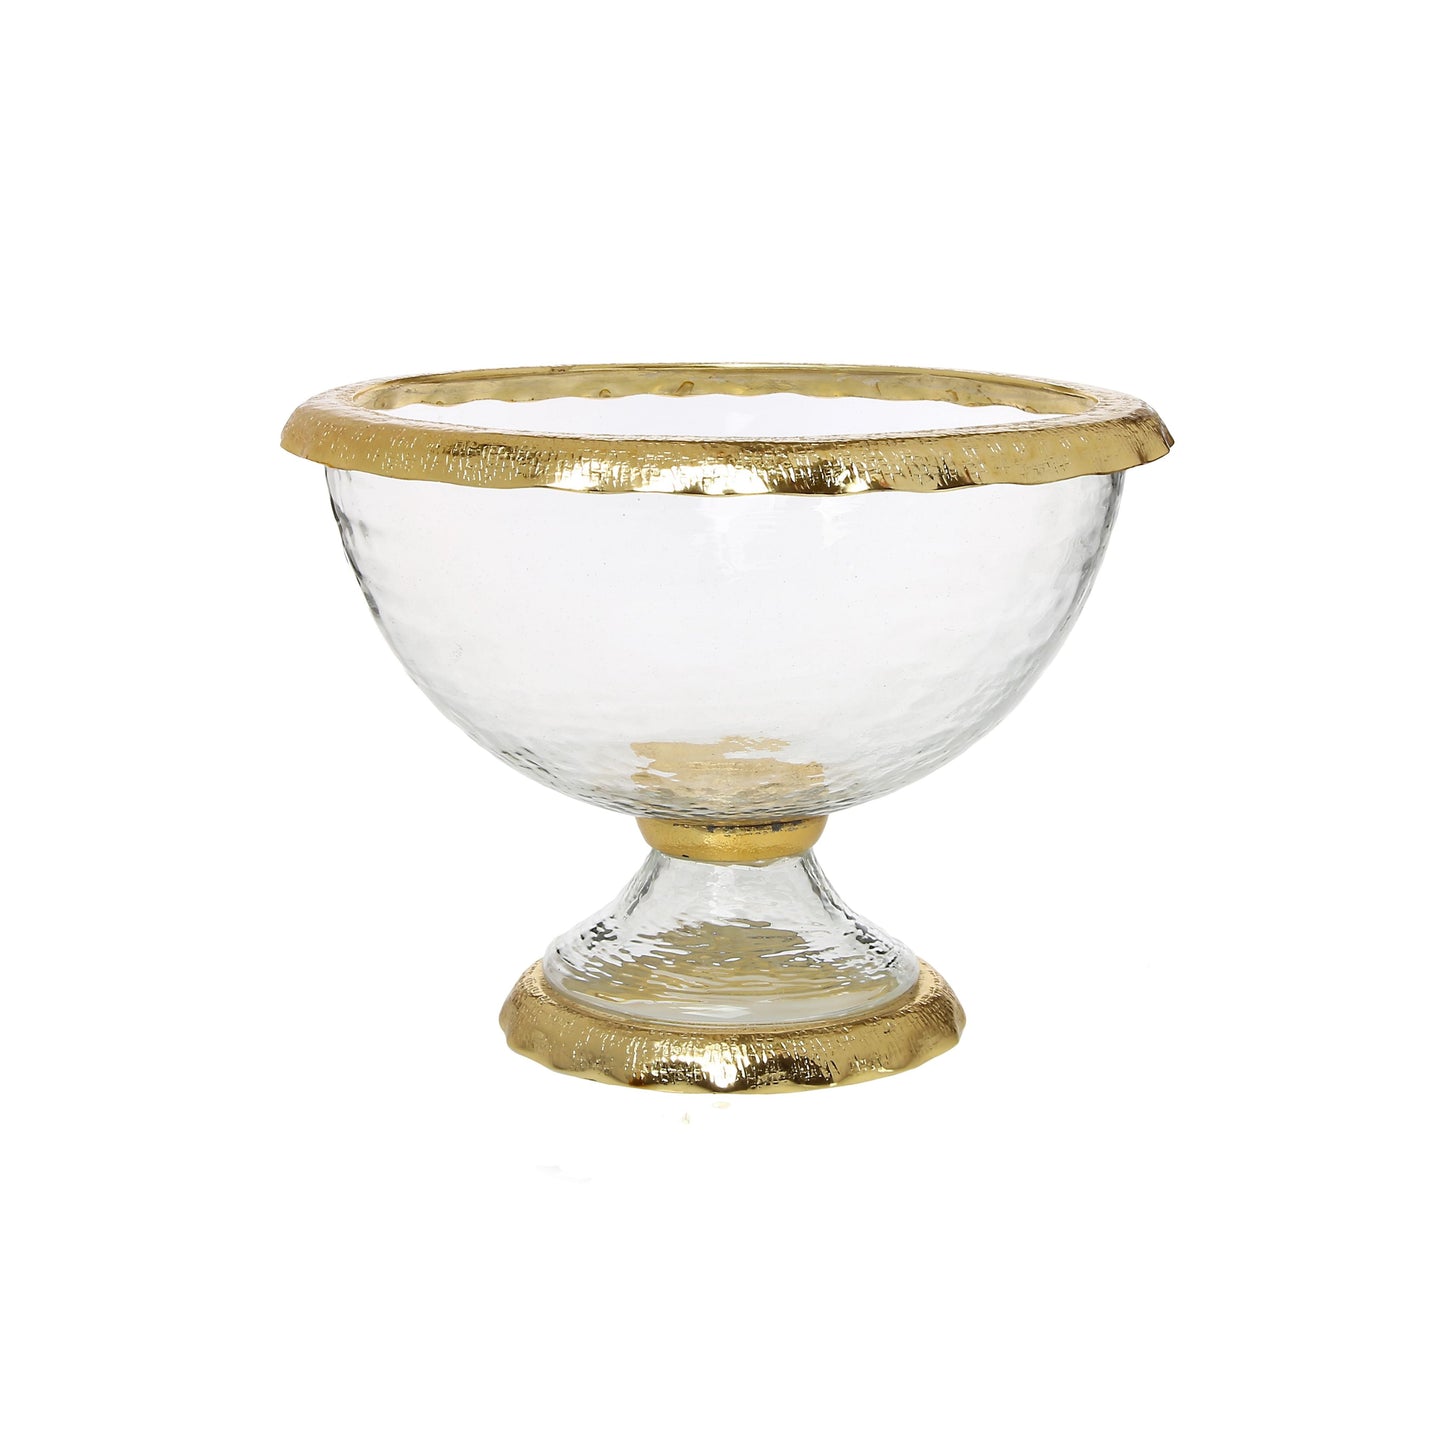 Classic Touch Decor Large Footed Bowl With Gold Border, 29"